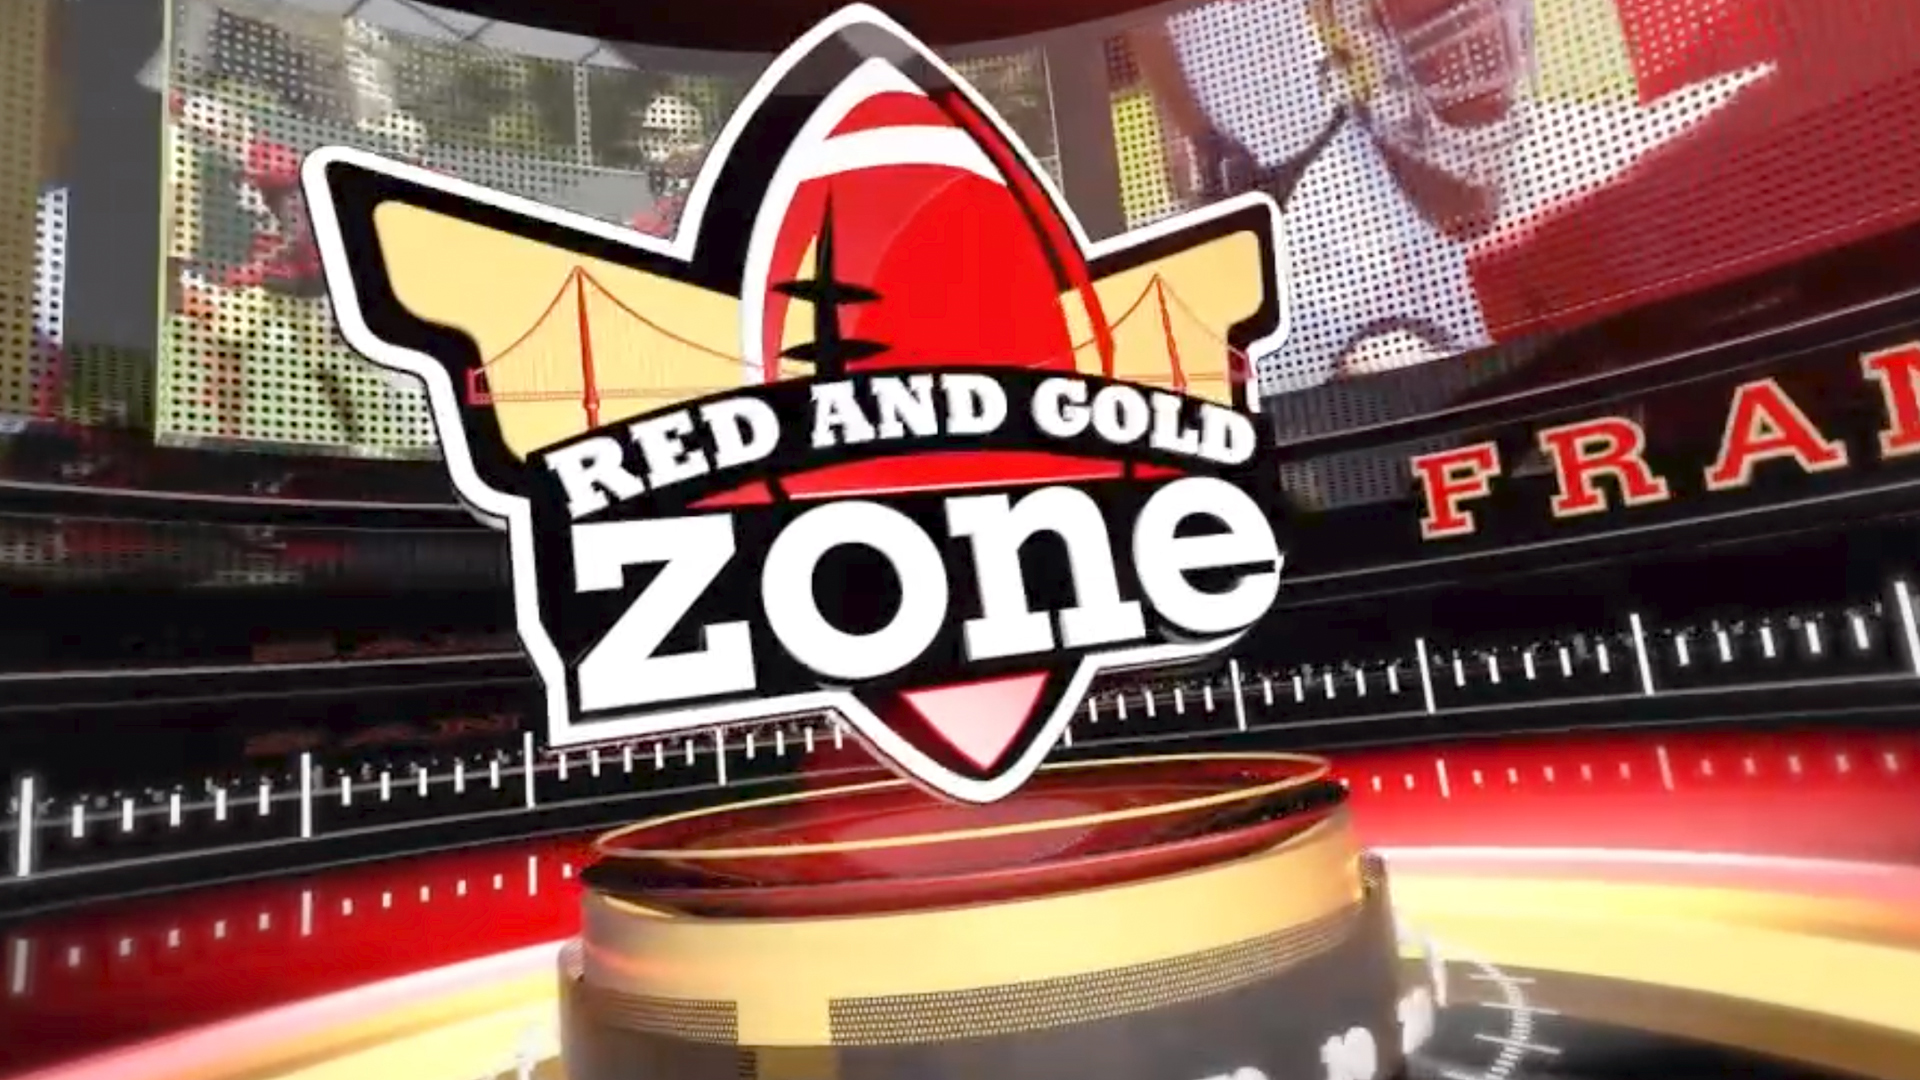 Red And Gold Zone - HD Wallpaper 